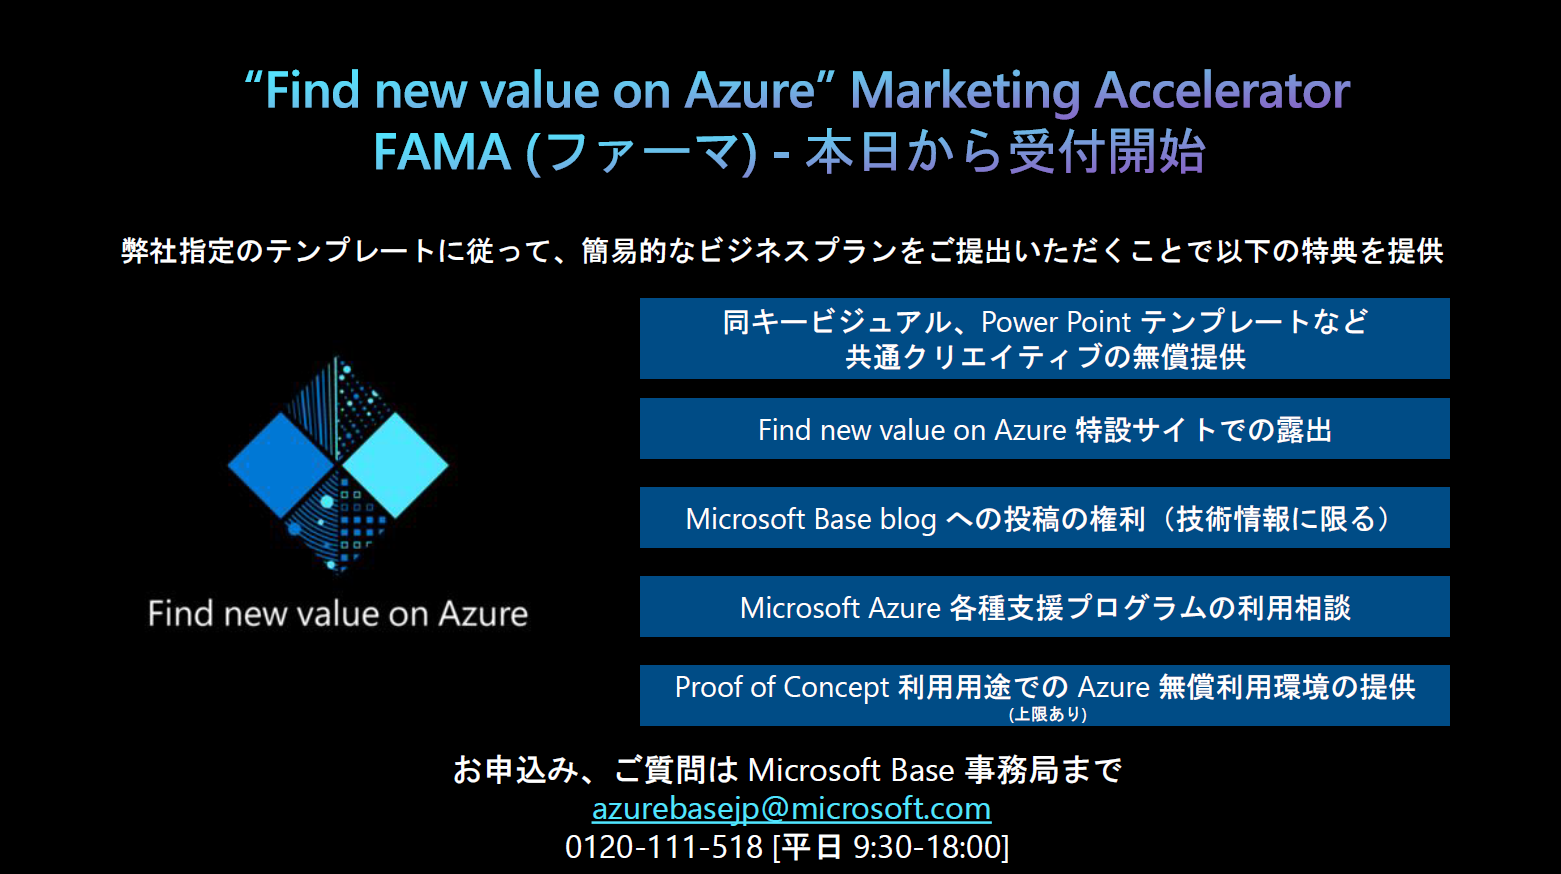 ”Find new Value on Azure” の立ち上げと “Microsoft Base” の全国展開